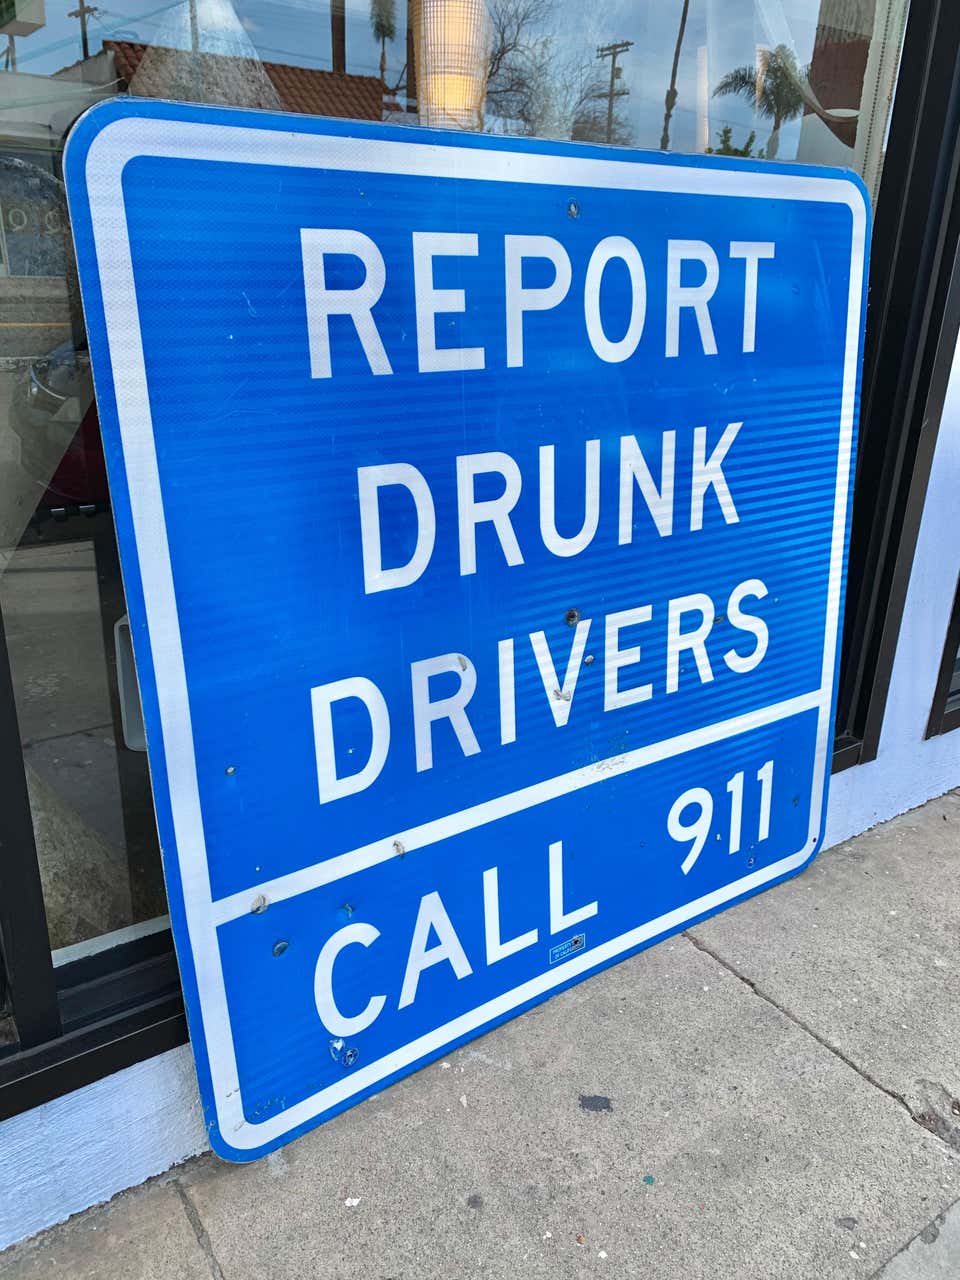 Monumental California Drunk Drivers Highway Sign